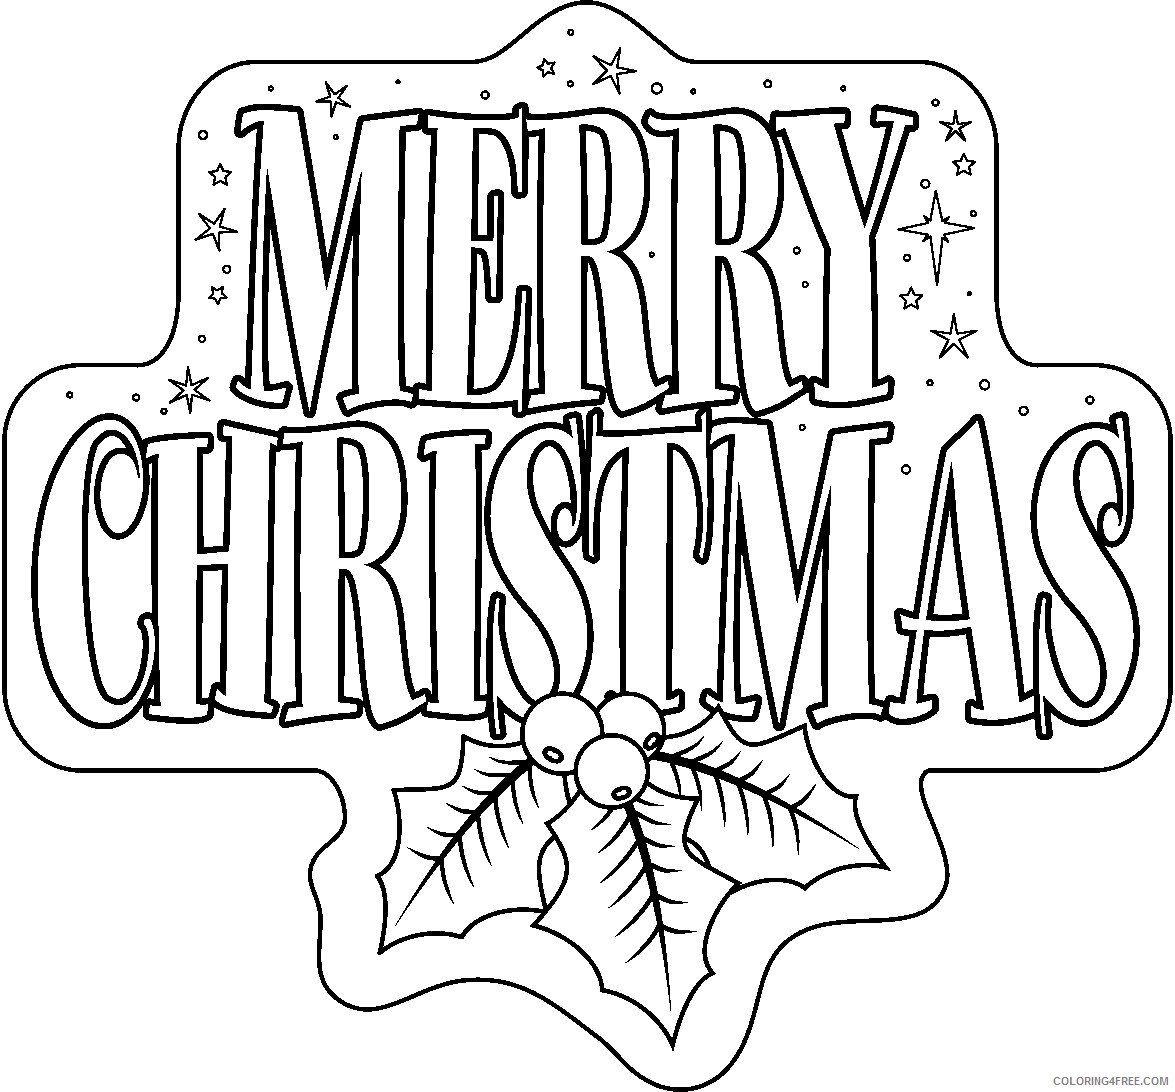 merry christmas coloring pages for kids Coloring4free